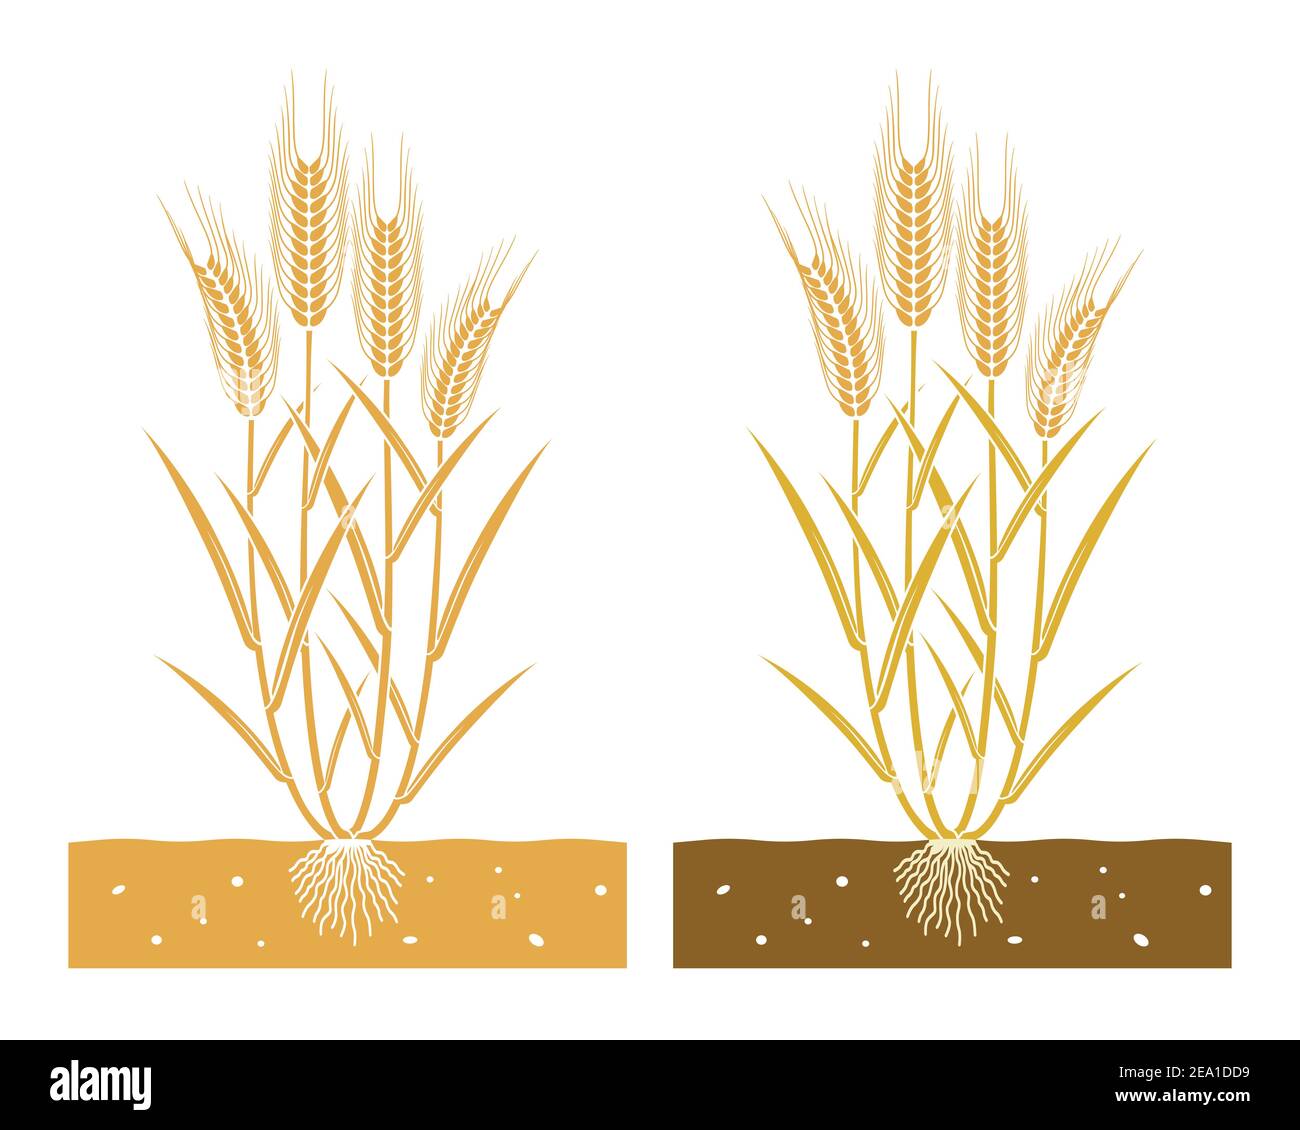 Images Of Wheat Plant